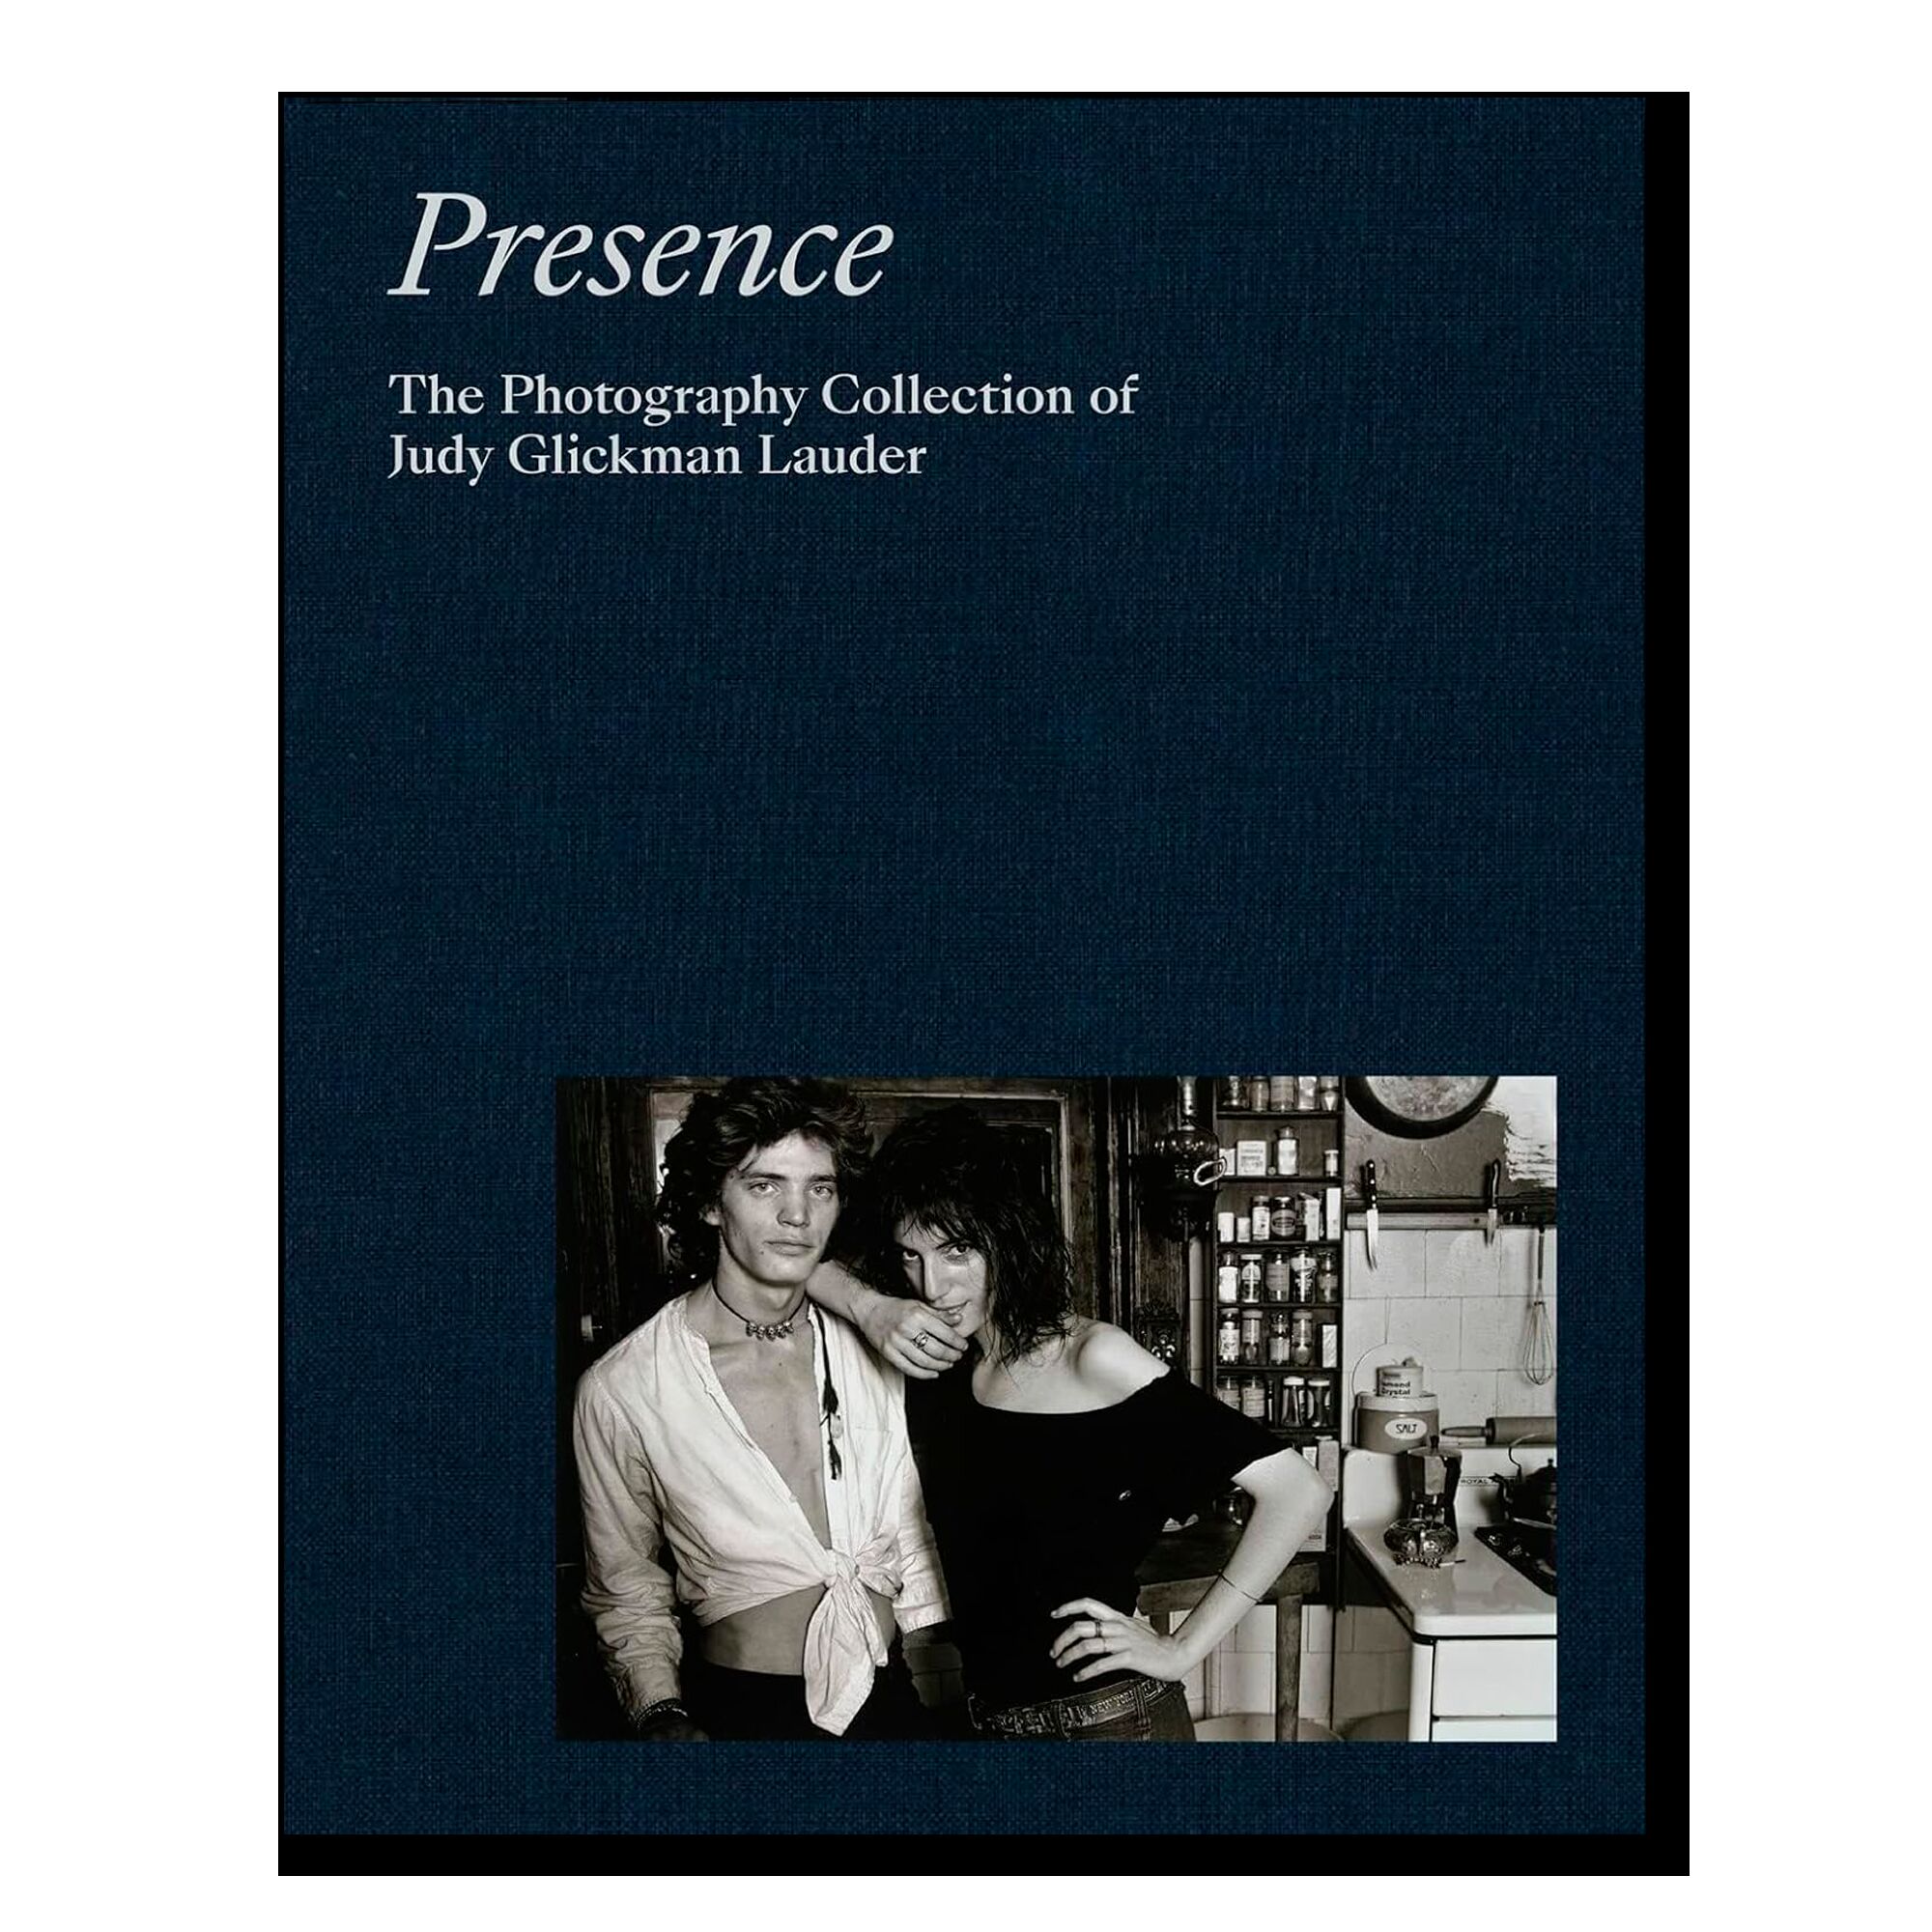 Presence: The Photography Collection of Judy Glickman Lauder